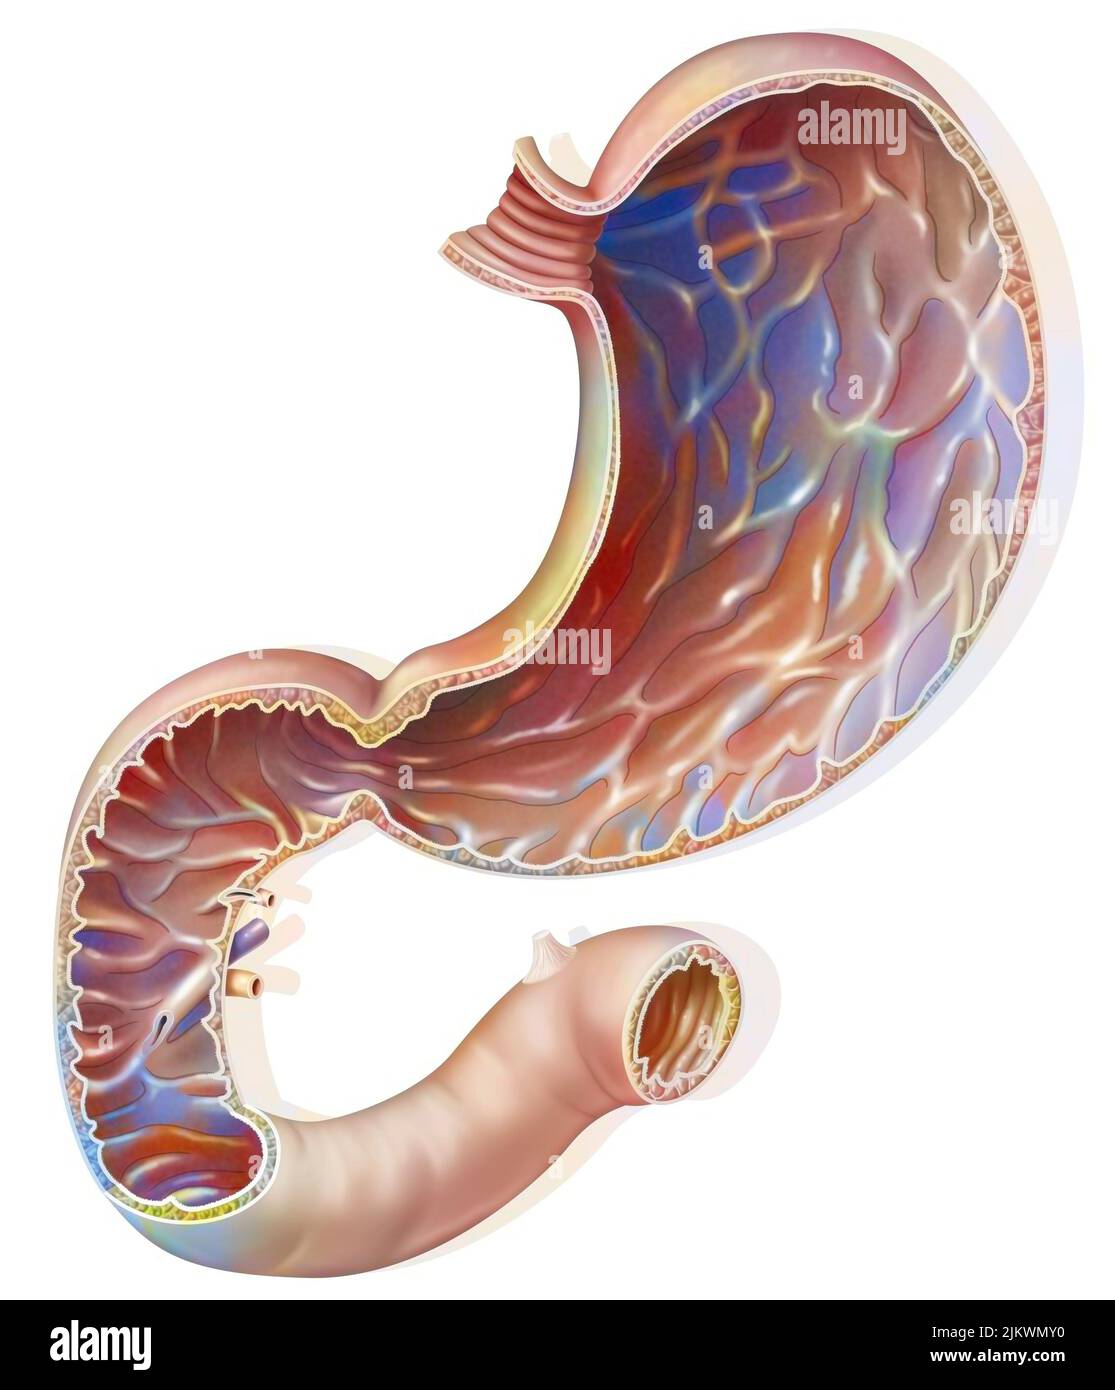 Section of the stomach and duodenum with the gastric mucosa. Stock Photo